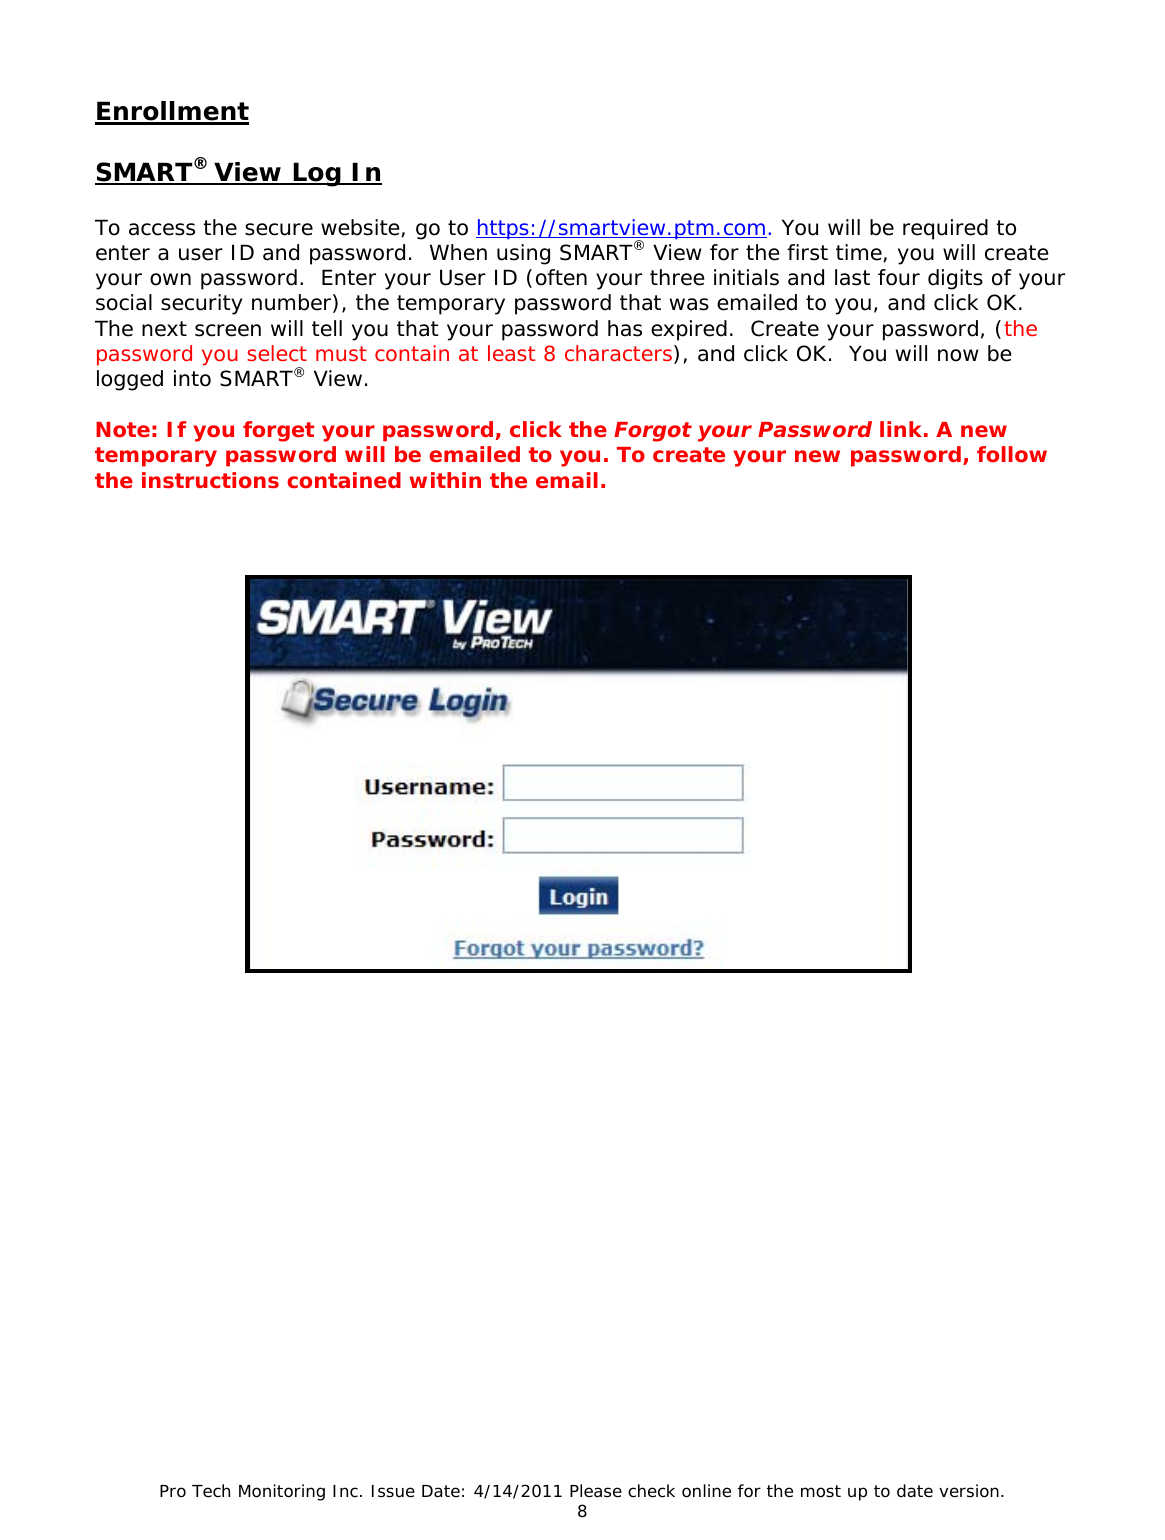 Pro Tech Monitoring Inc. Issue Date: 4/14/2011 Please check online for the most up to date version. 8  Enrollment  SMART® View Log In  To access the secure website, go to https://smartview.ptm.com. You will be required to enter a user ID and password.  When using SMART® View for the first time, you will create your own password.  Enter your User ID (often your three initials and last four digits of your social security number), the temporary password that was emailed to you, and click OK.  The next screen will tell you that your password has expired.  Create your password, (the password you select must contain at least 8 characters), and click OK.  You will now be logged into SMART® View.  Note: If you forget your password, click the Forgot your Password link. A new temporary password will be emailed to you. To create your new password, follow the instructions contained within the email.                                